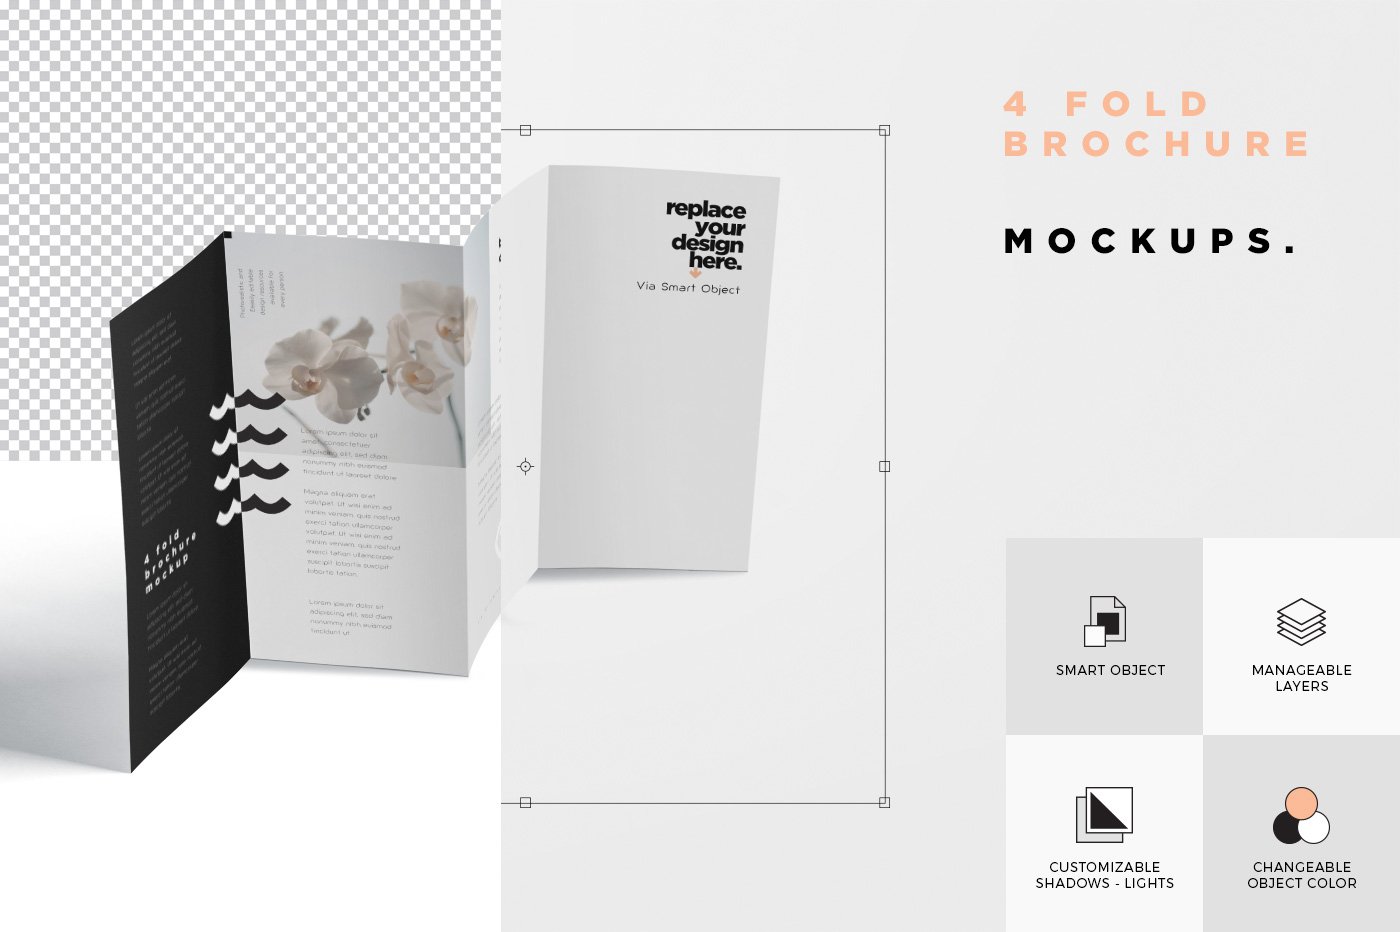 mockup features image 776